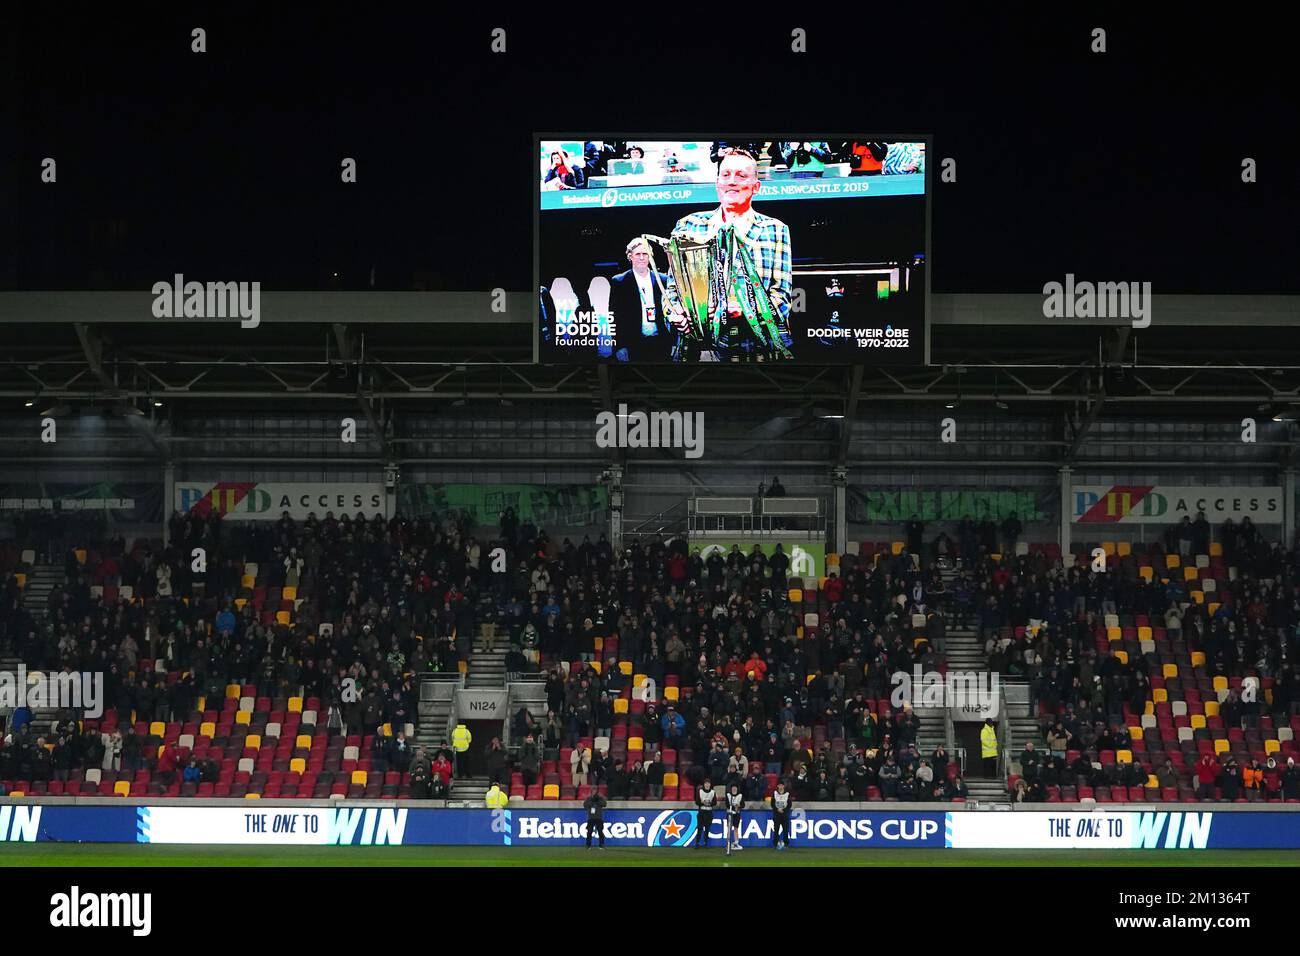 London Irish and Montpellier players during a minute silence for former Scotland rugby union player Doddie Weir before the Heineken Champions Cup match at the Gtech Community Stadium, London. Picture date: Friday December 9, 2022. Stock Photo